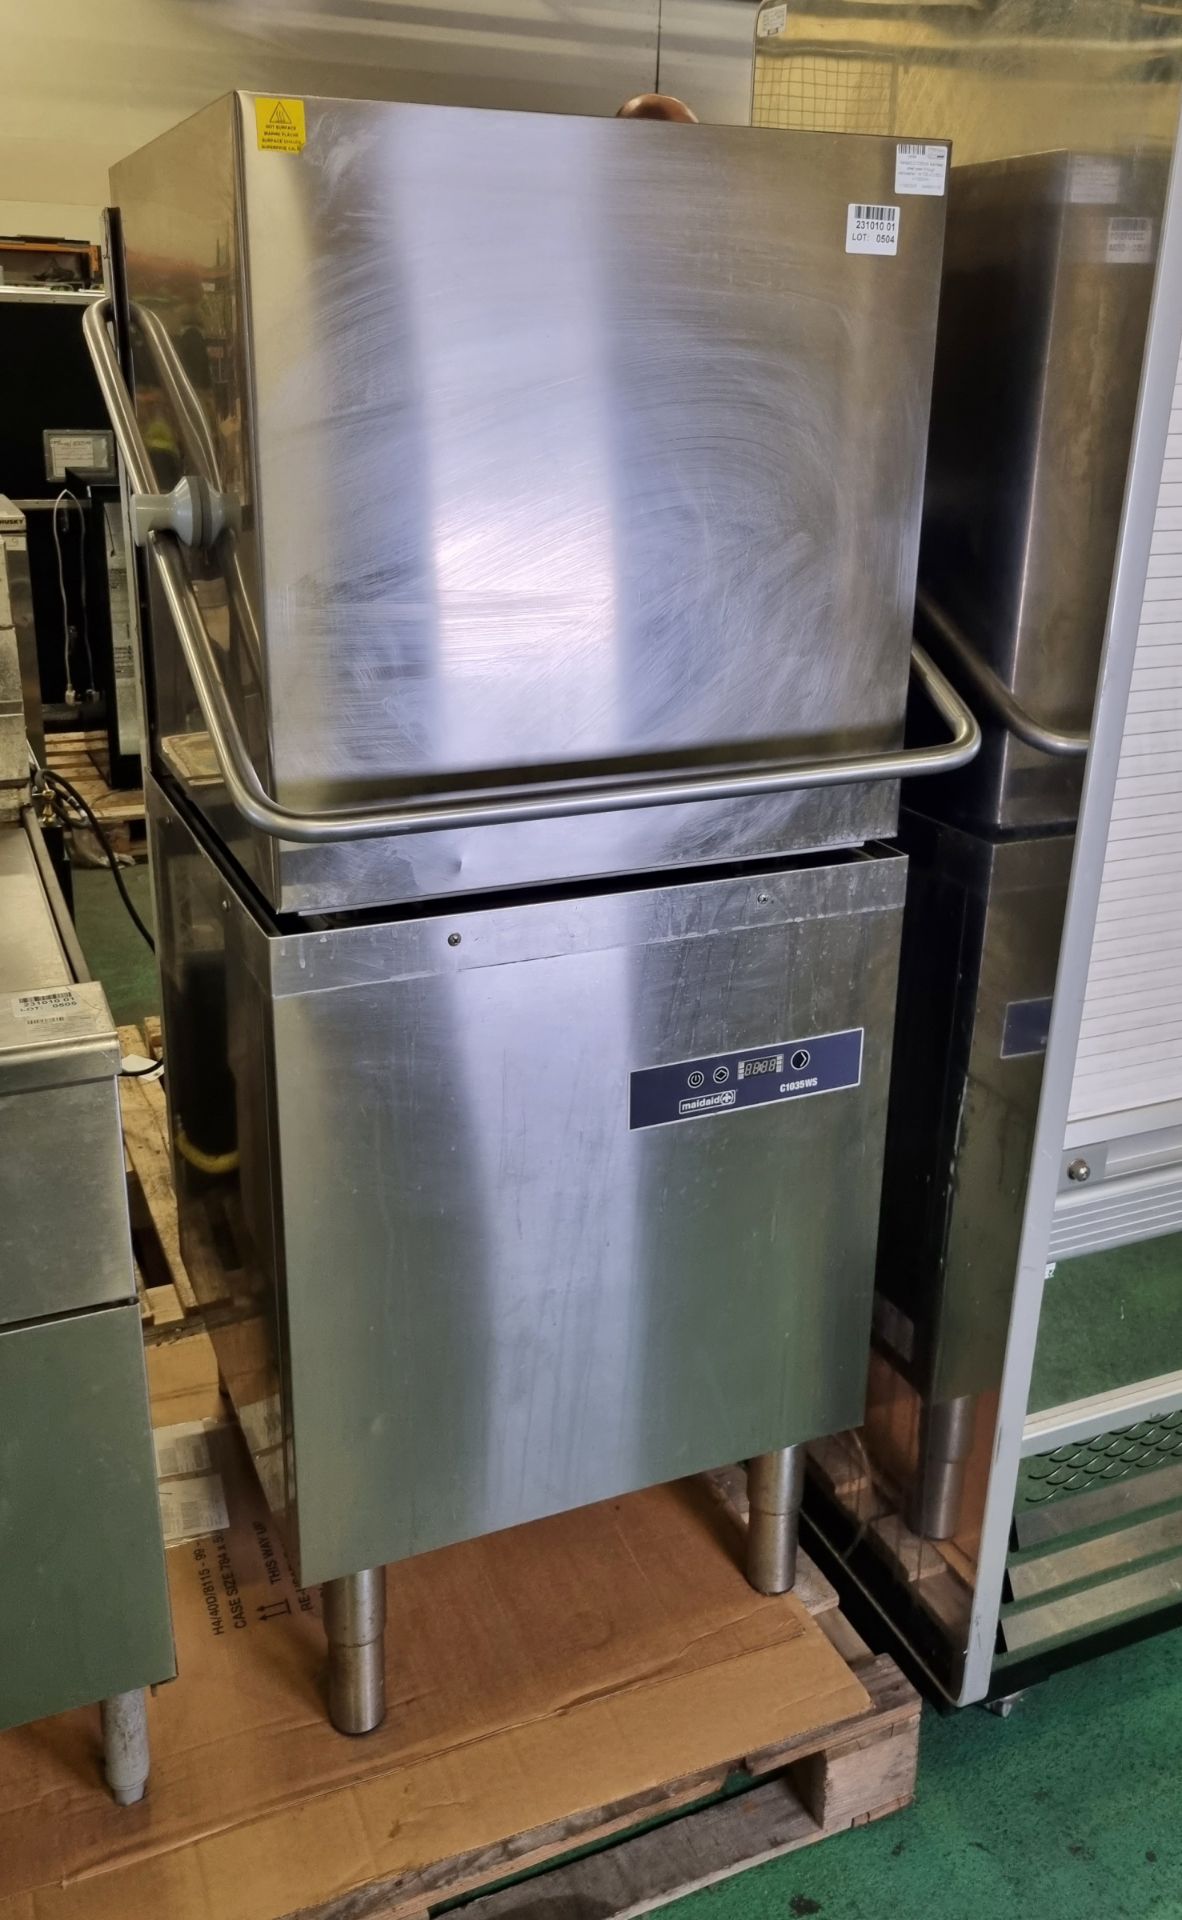 Maidaid C1035WS stainless steel pass through dishwasher - W 700 x D 850 x H 1500mm - Image 2 of 5